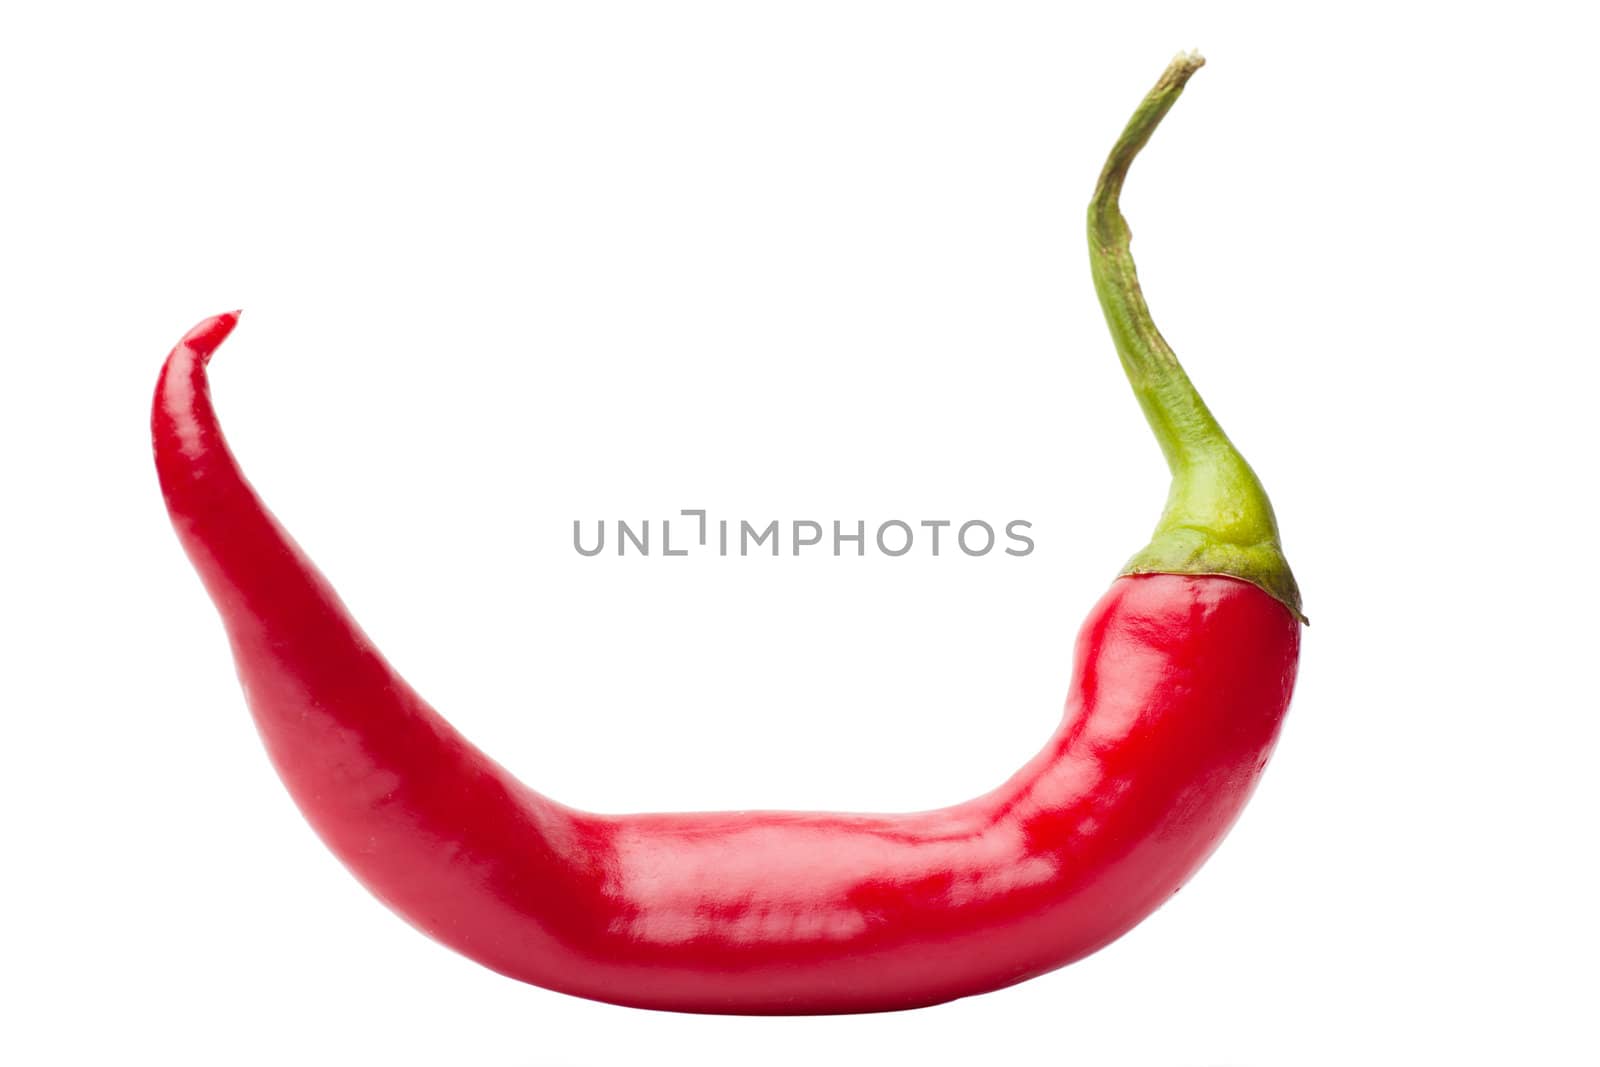 Closeup view of red chili pepper isolated over white background